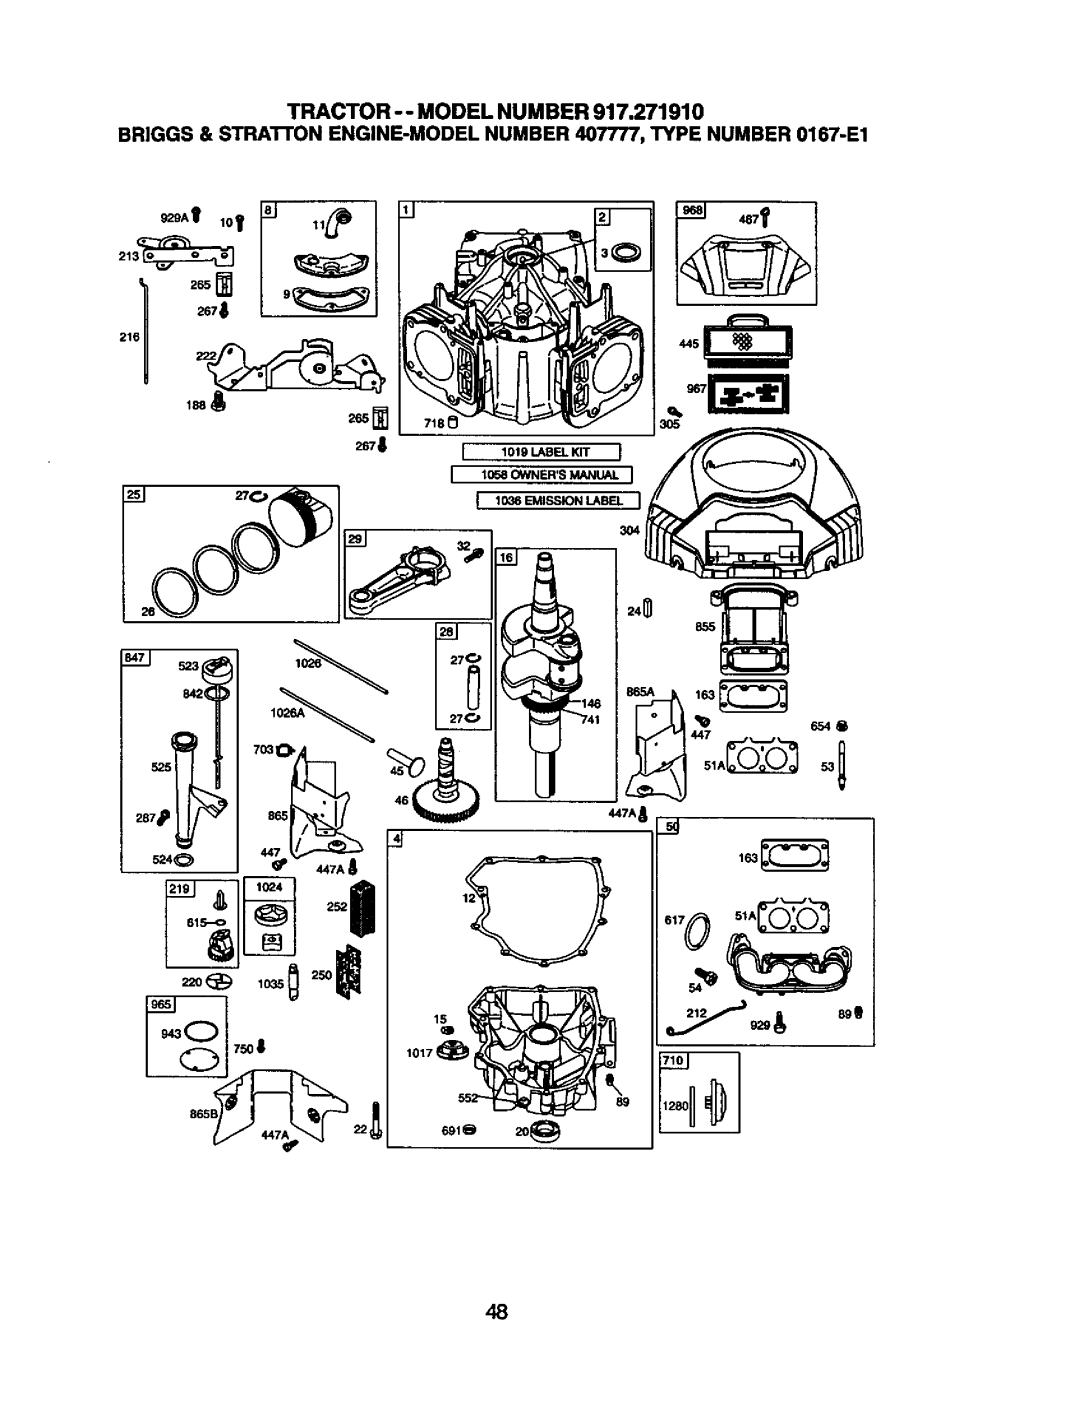 Craftsman 917.27191 owner manual Tractor --Model Number, _AI 101 I _1_, Iio_Owners._Iu_ 